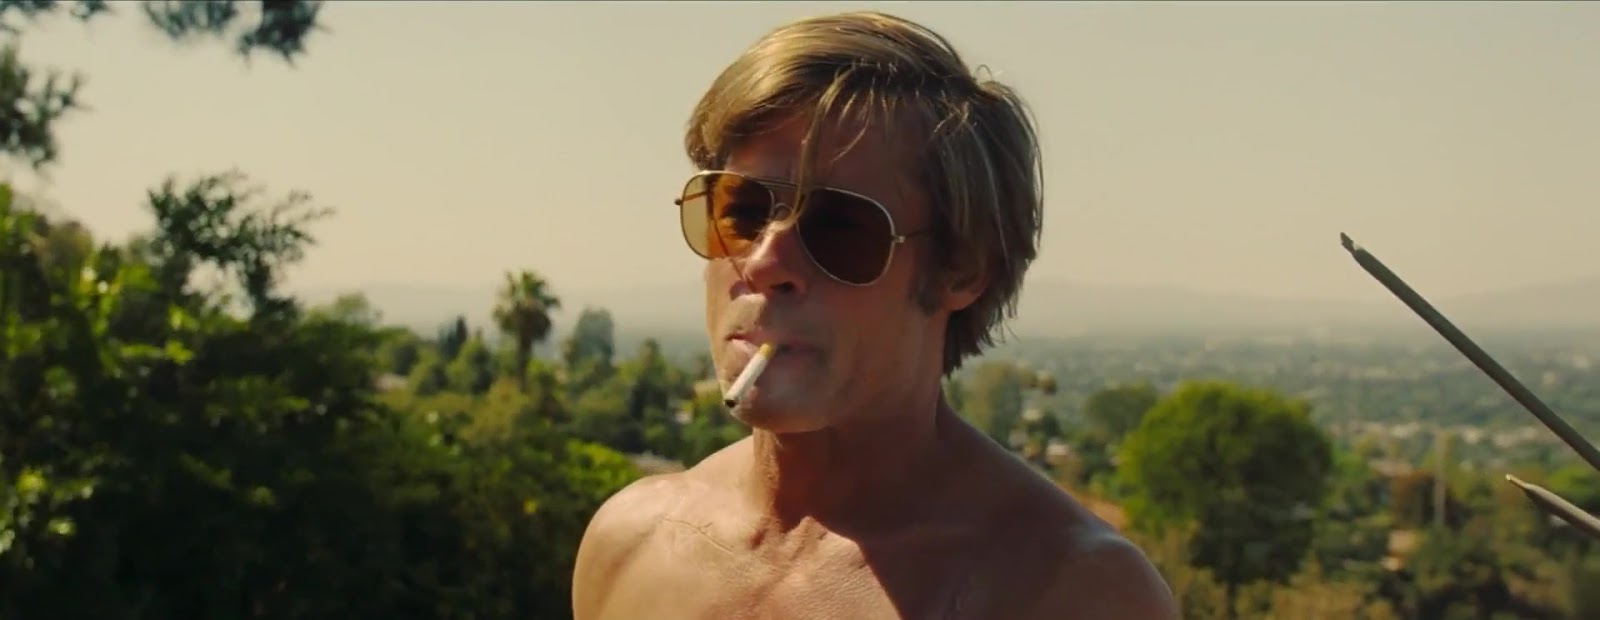 ausCAPS: Brad Pitt shirtless in Once Upon A Time In Hollywood